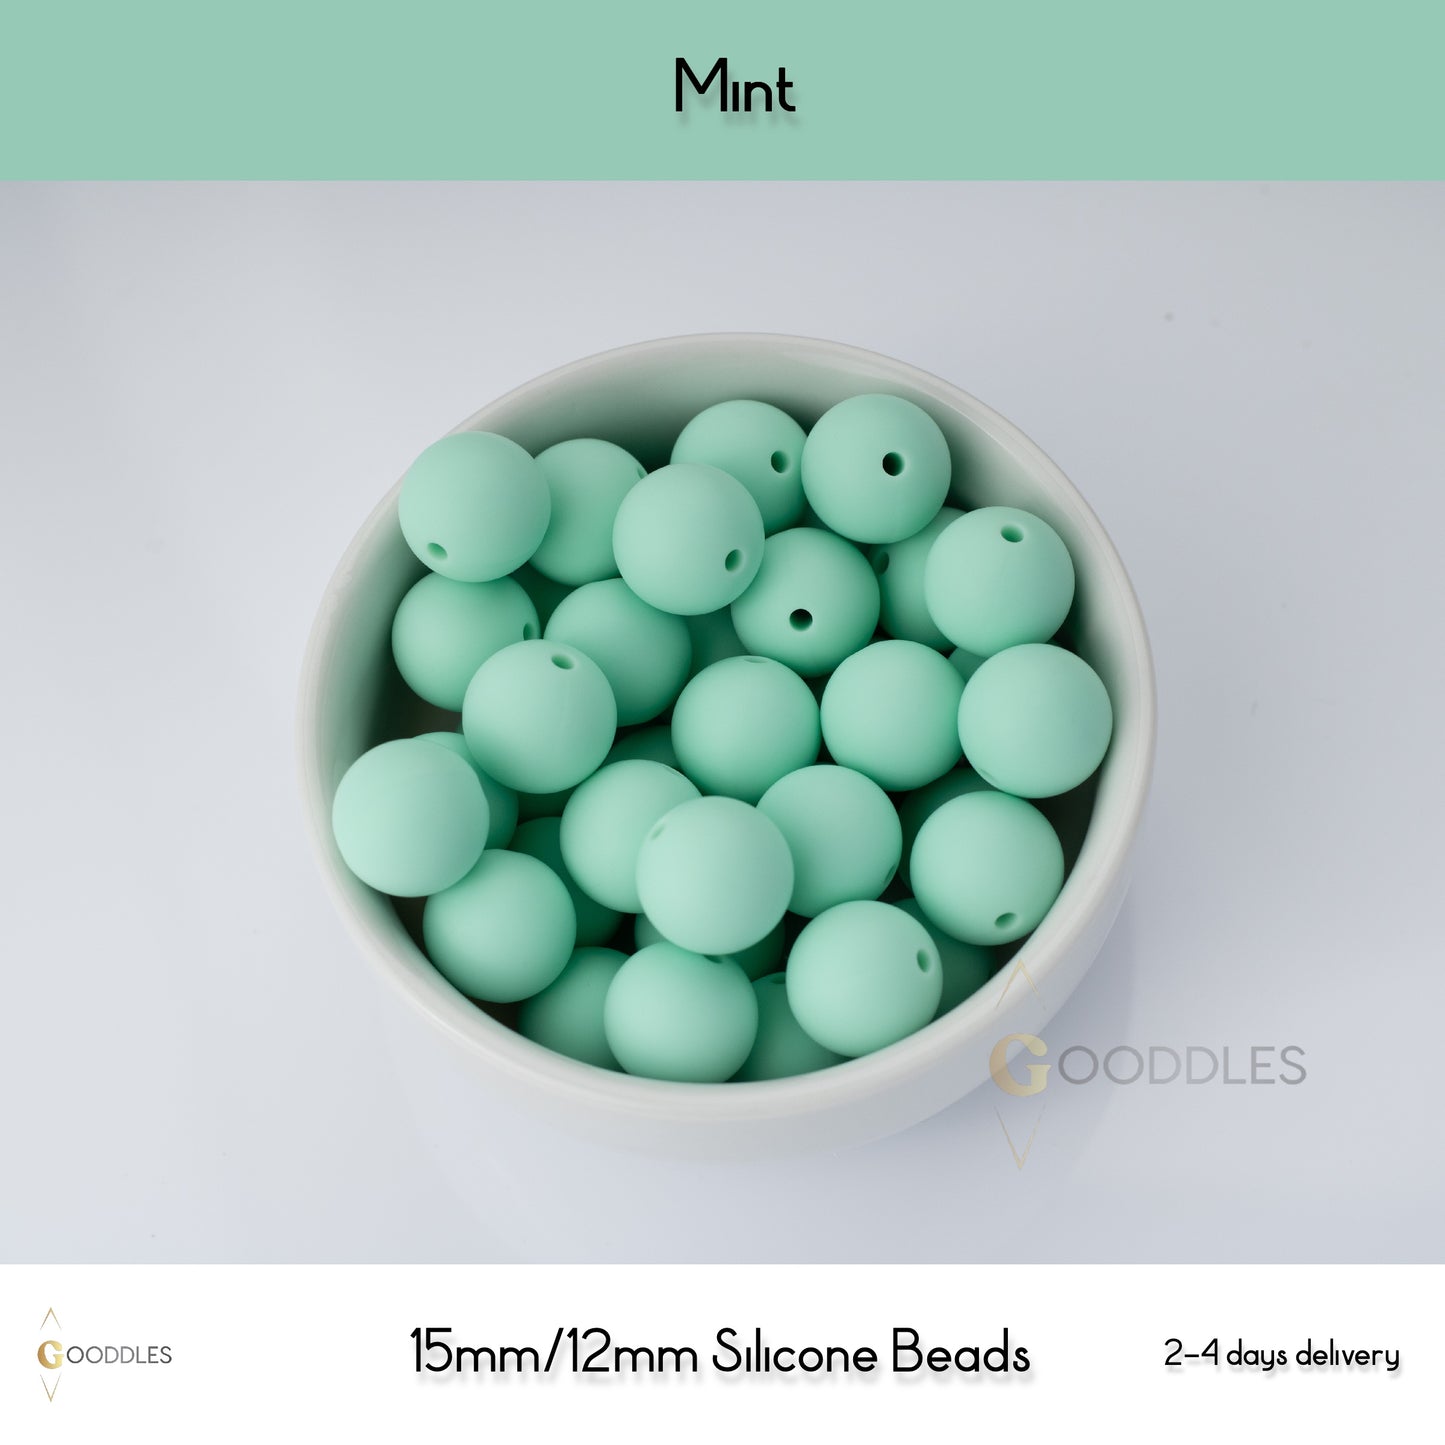 5pcs, Mint Silicone Beads Round Silicone Beads